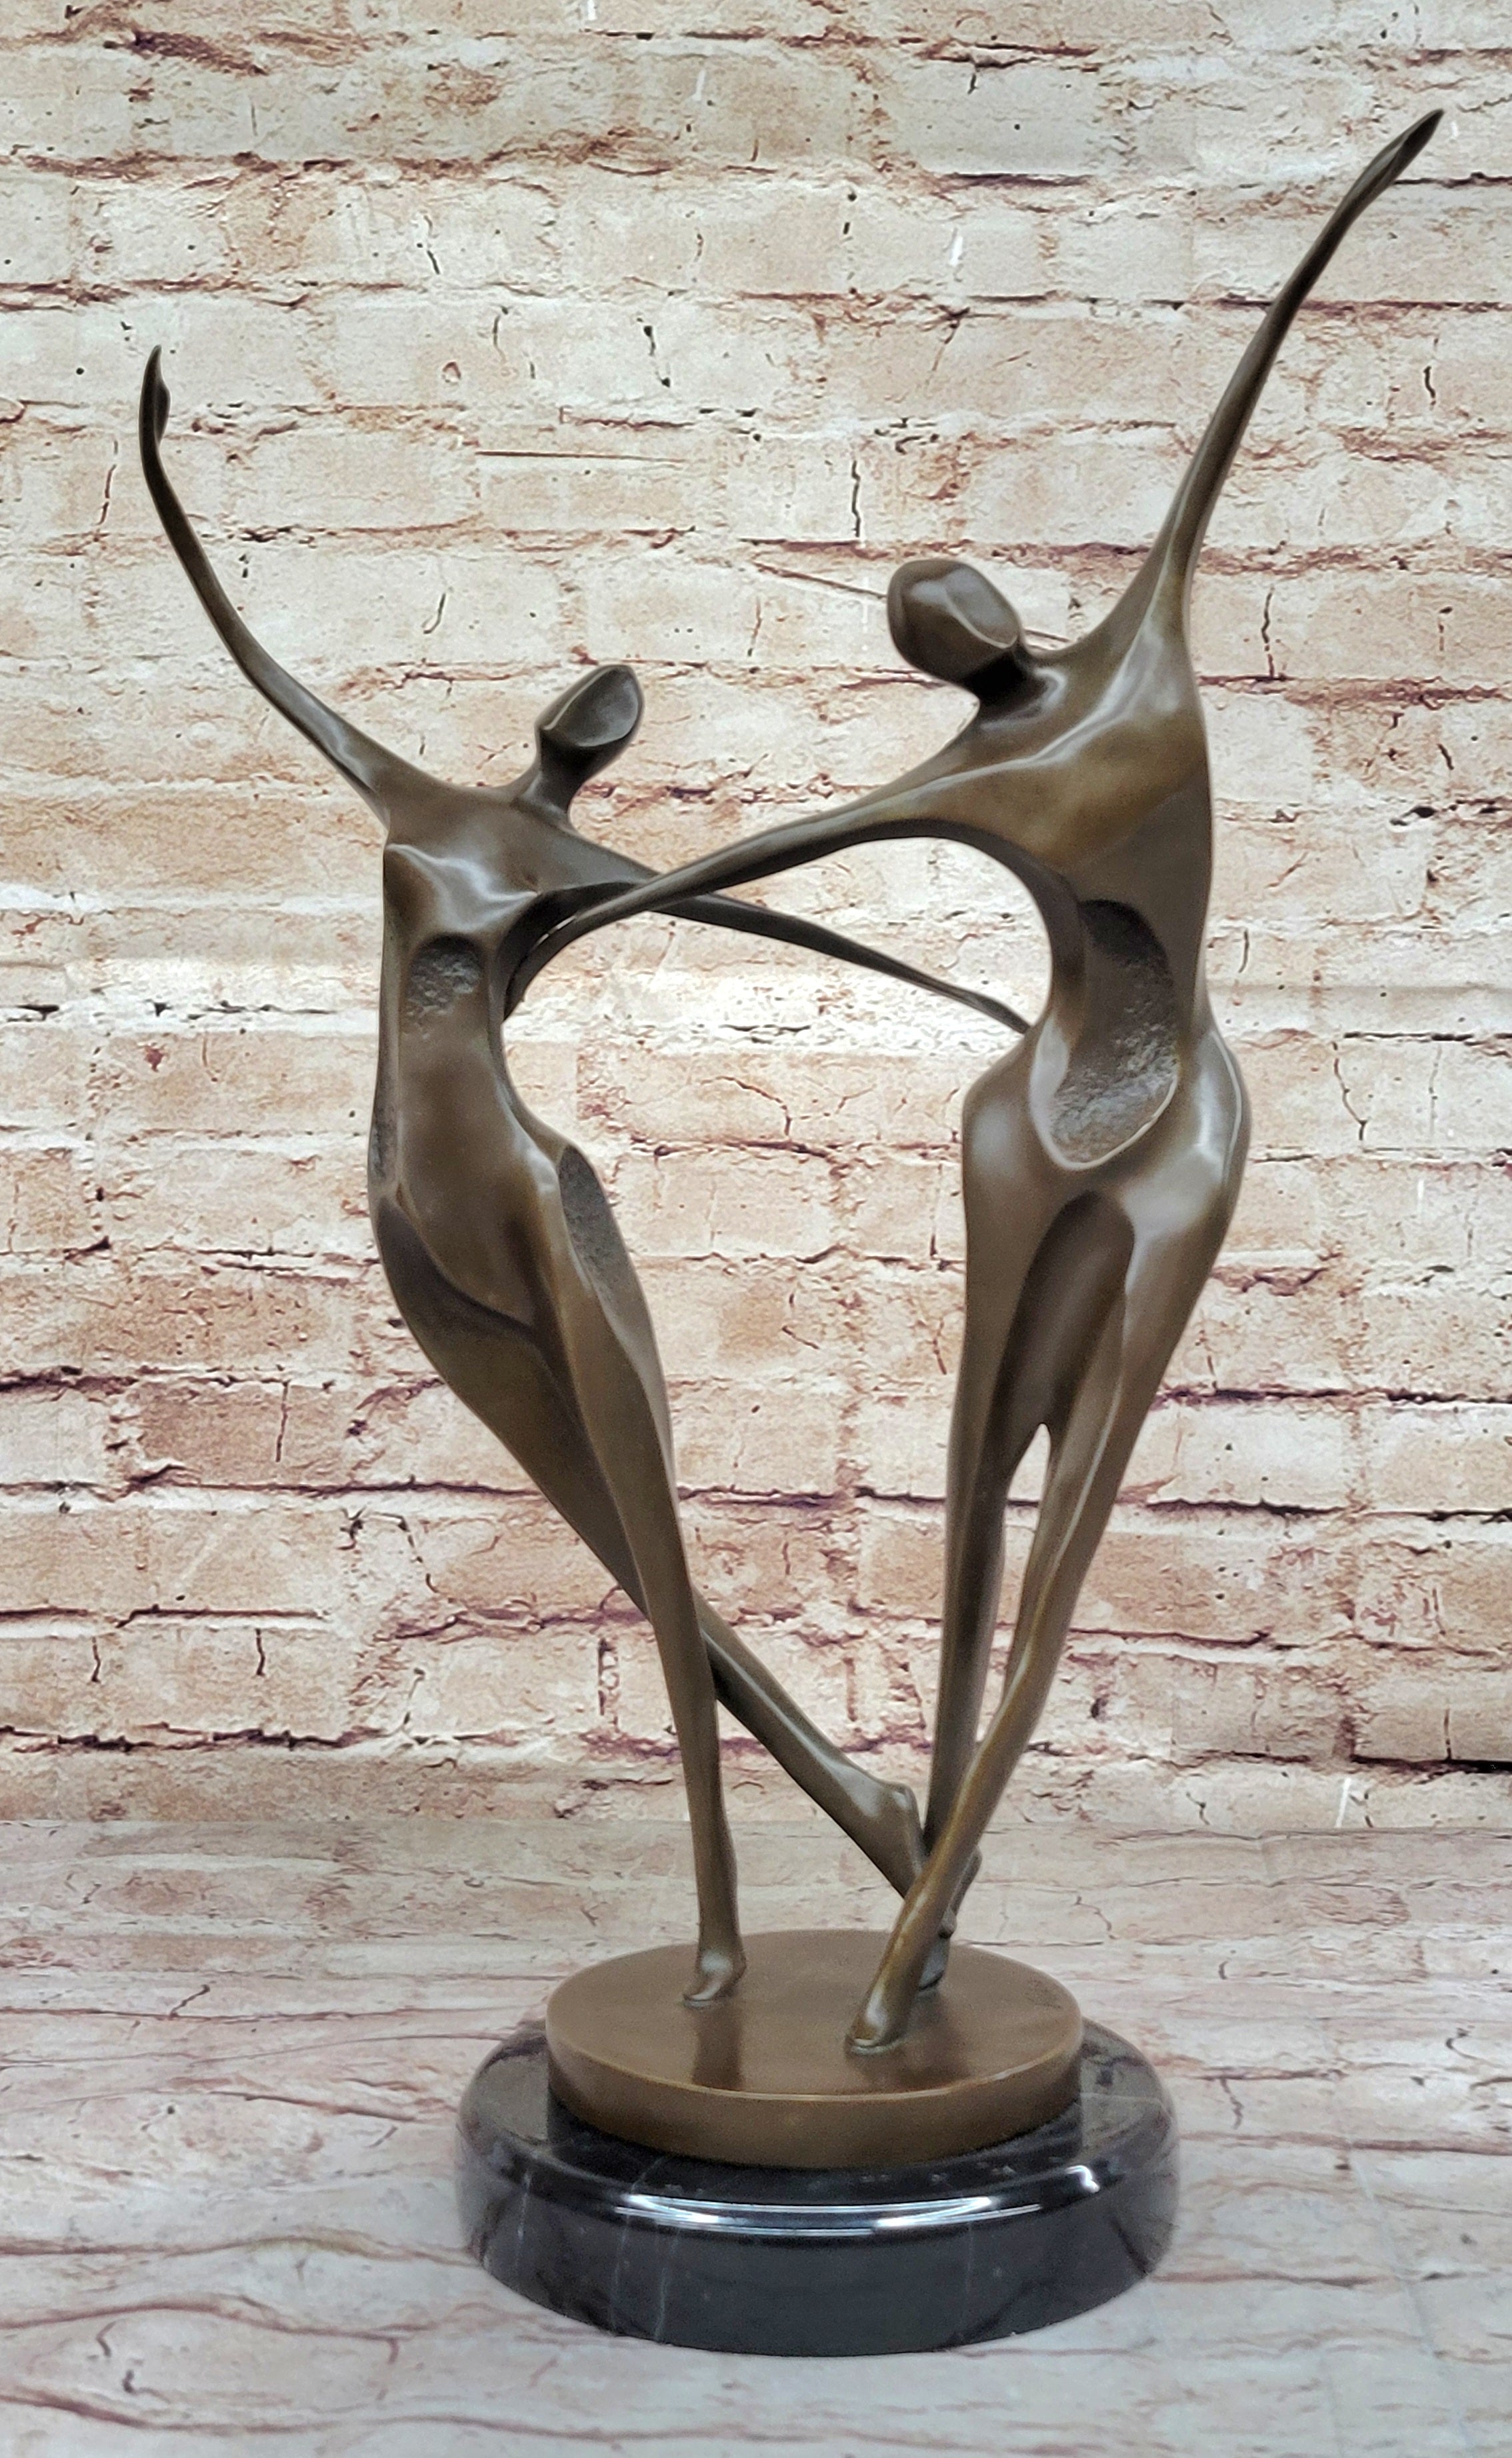 SIGNED ABSTRACT SHALL WE DANCE BRONZE SCULPTURE BY MILO HAND MADE BY LOST WAX